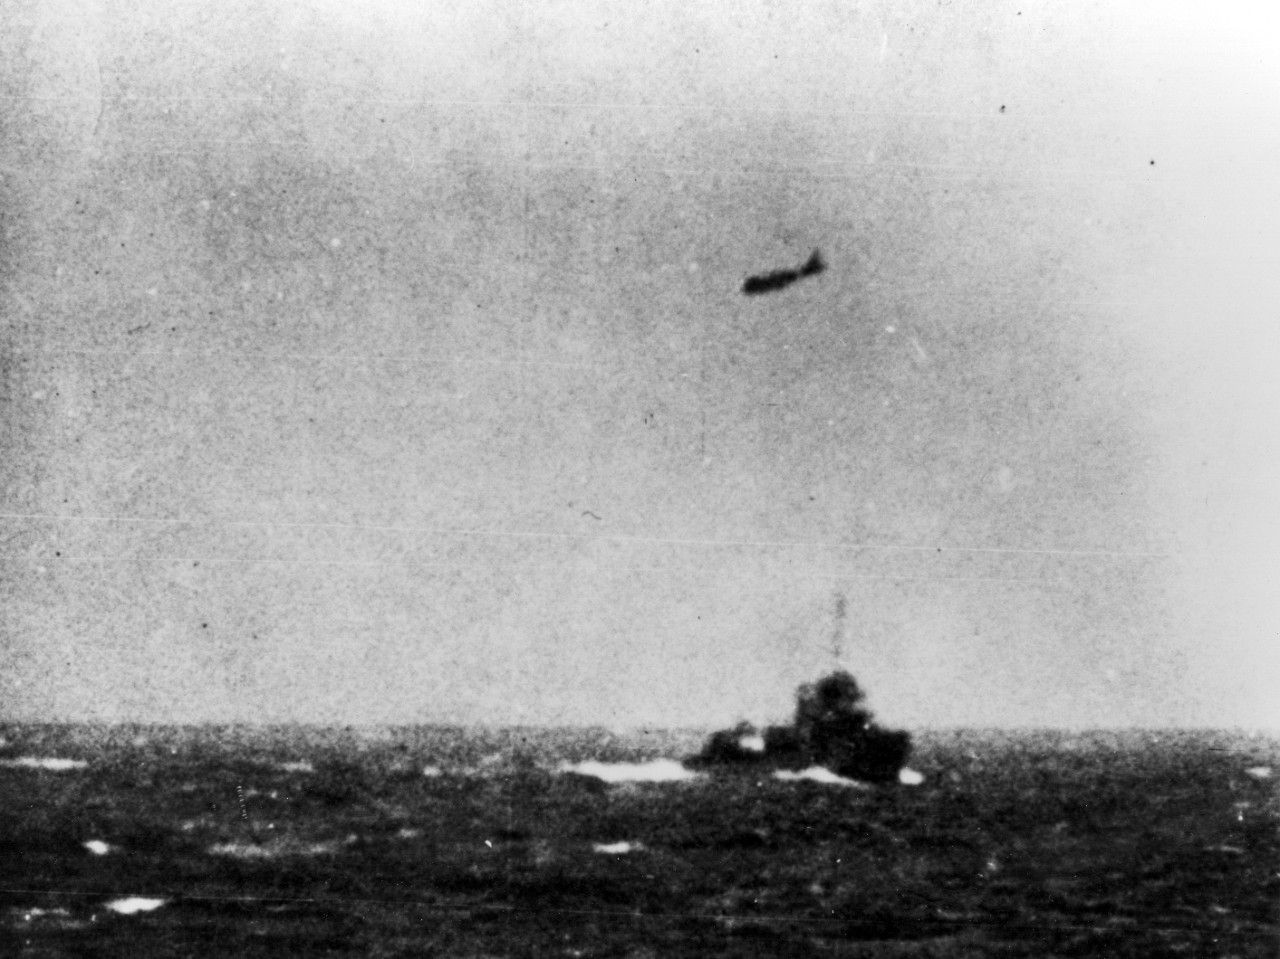 Photo #: 80-G-16639  Battle of the Coral Sea, May 1942